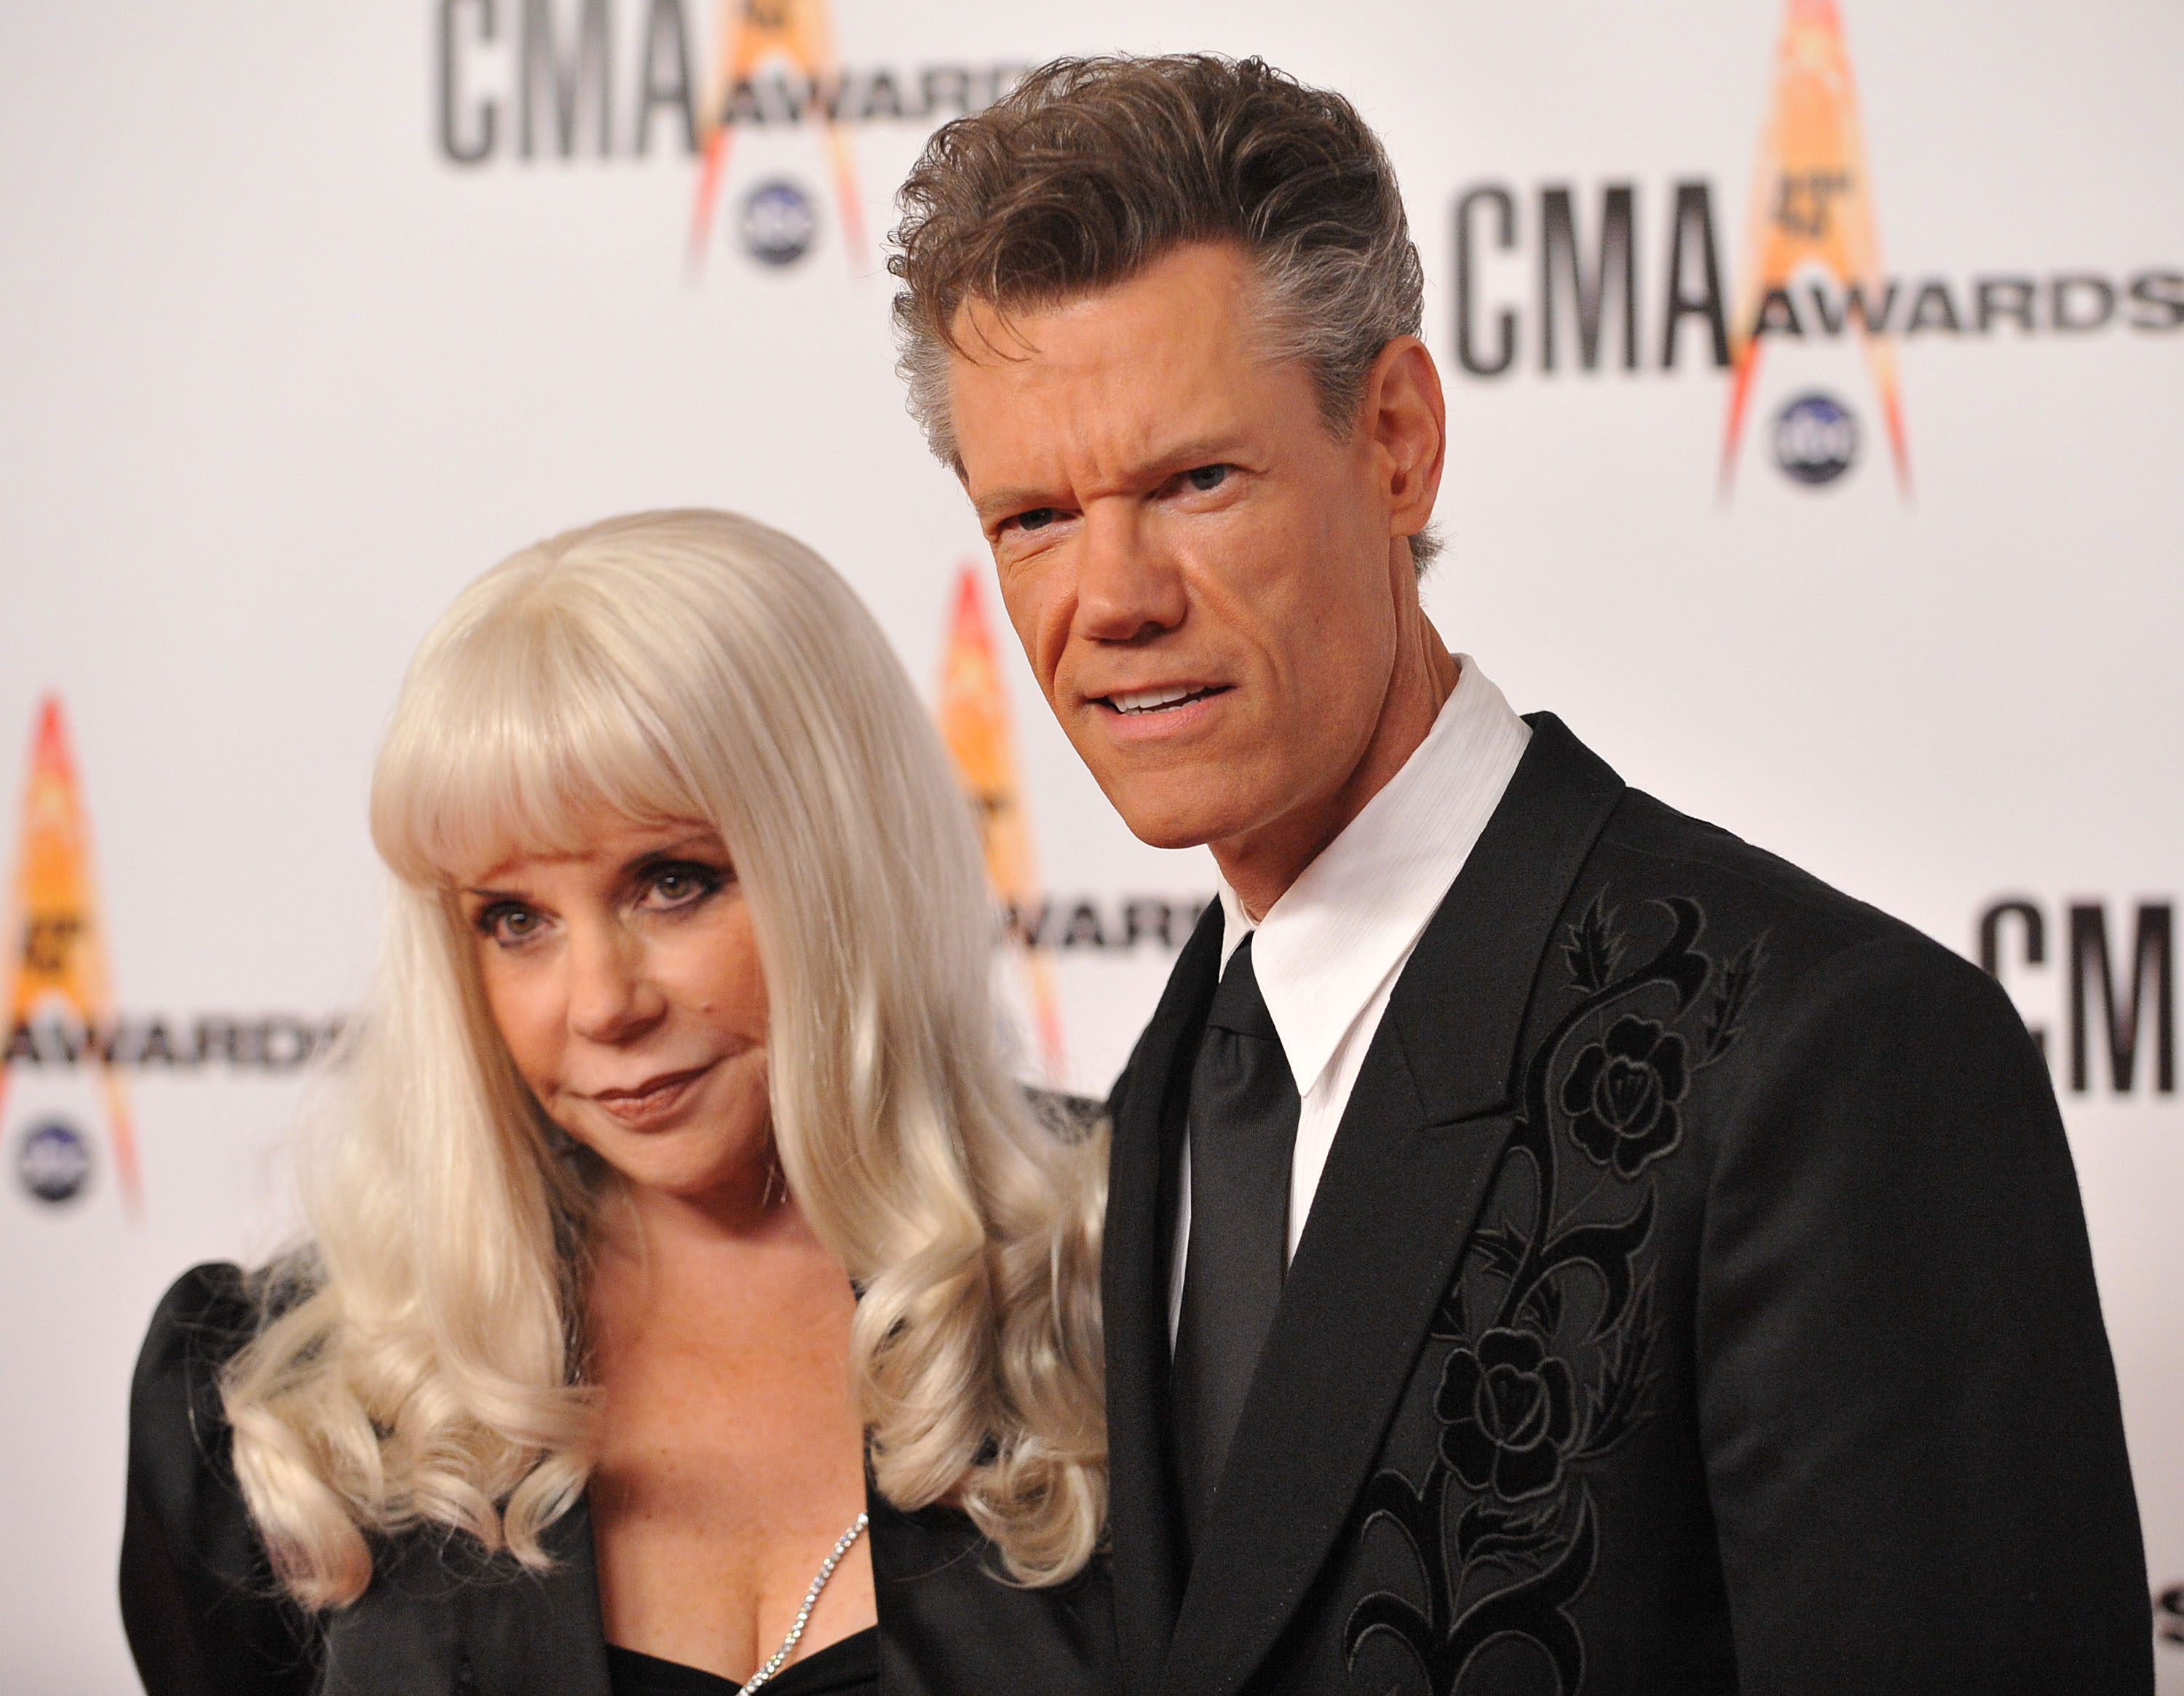 Randy Travis and Elizabeth Hatcher-Travis at the 43rd Annual CMA Awards on November 11, 2009, in Nashville, Tennessee. | Source: Getty Images